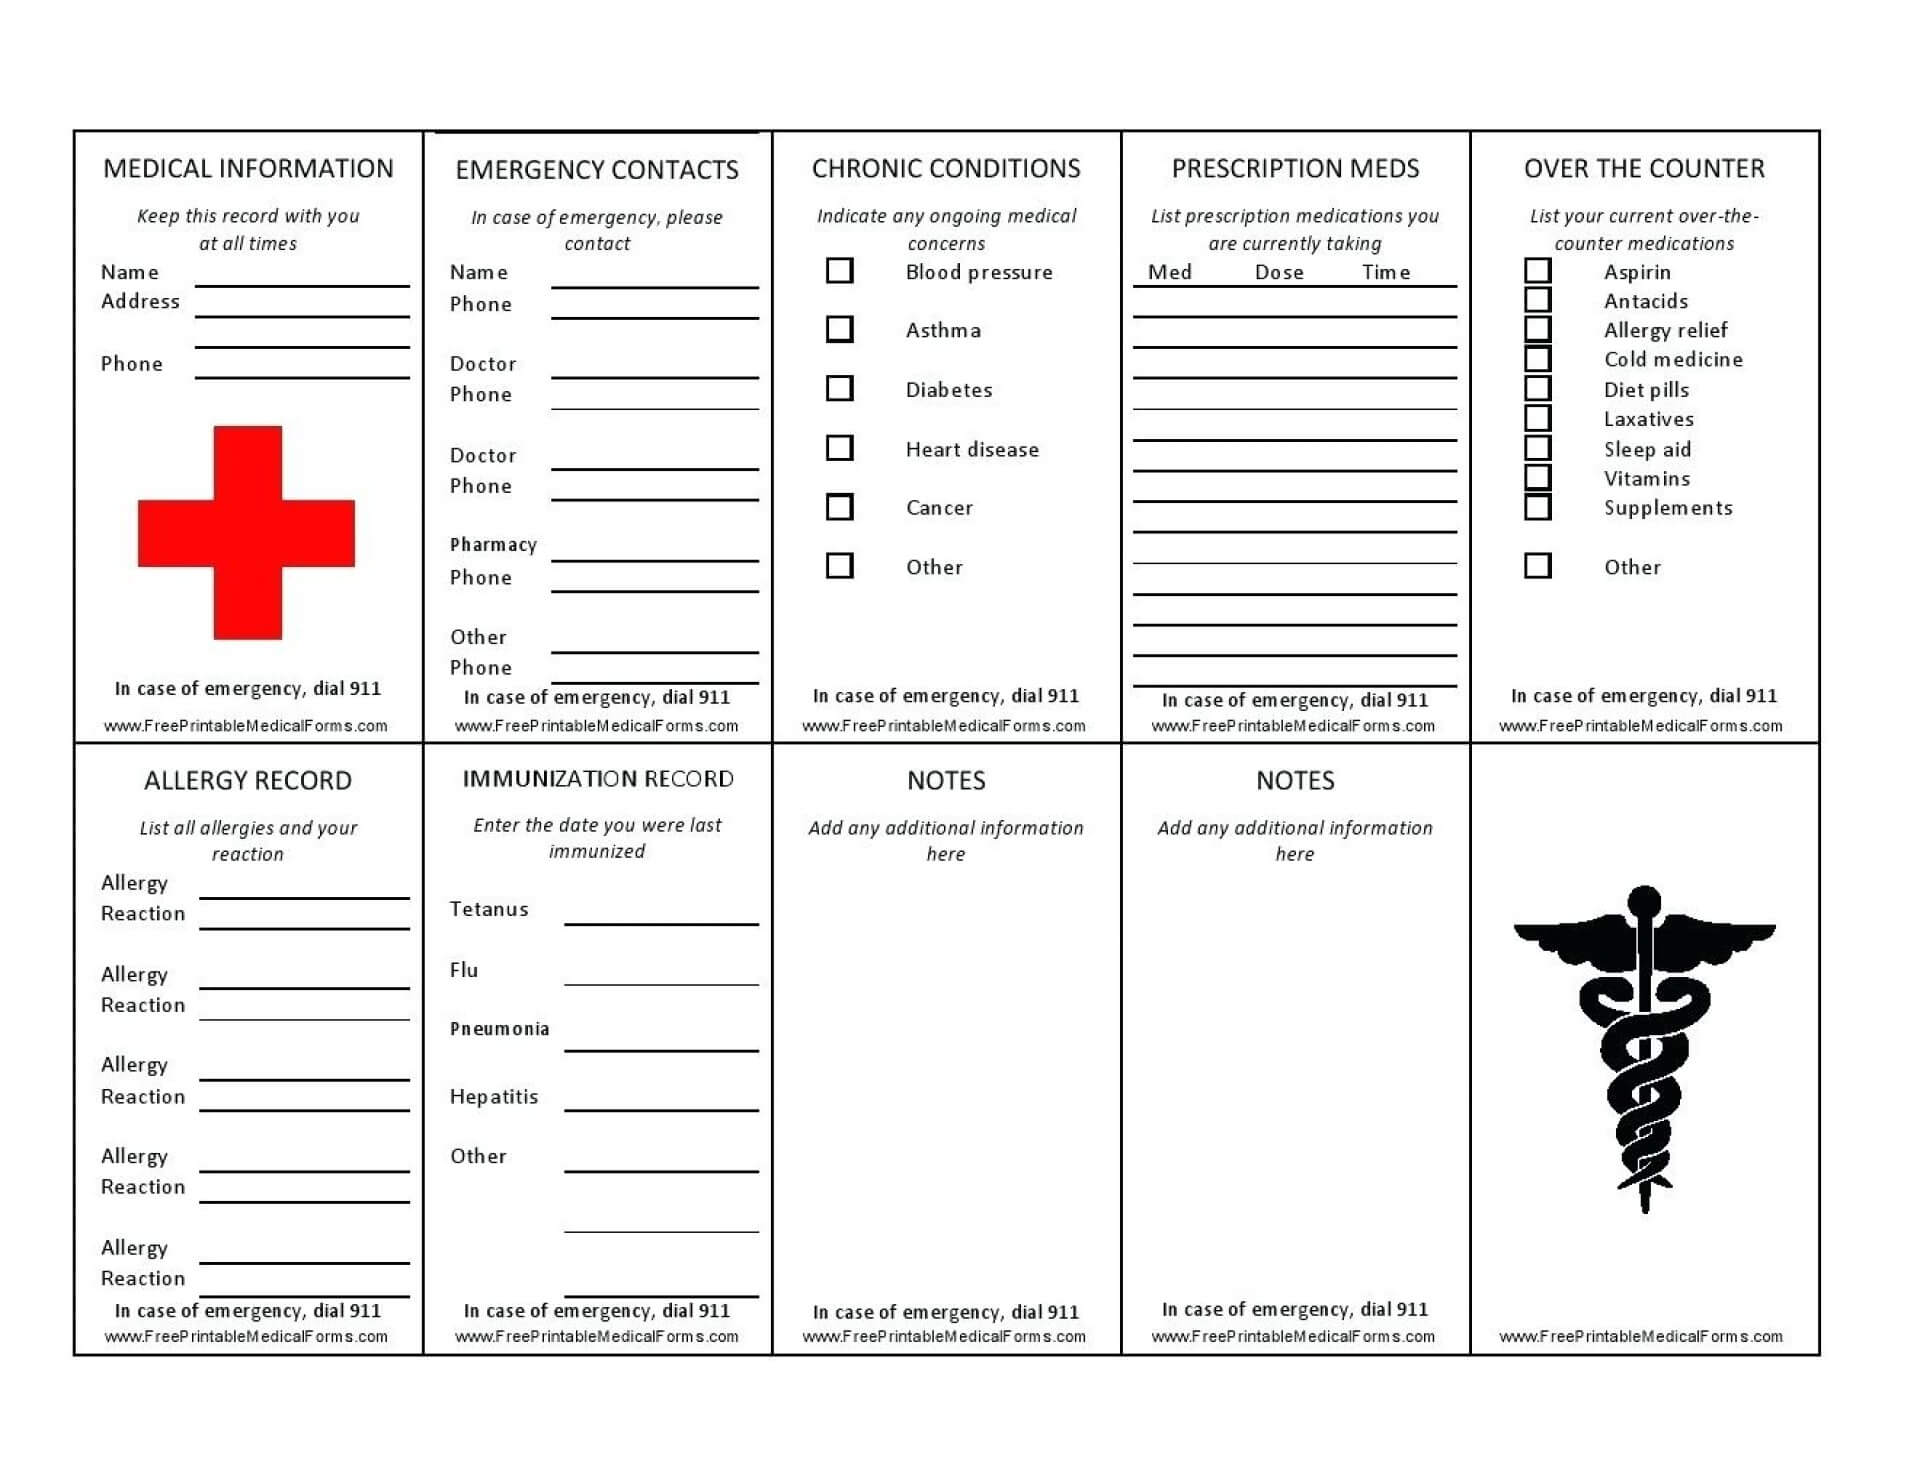 047 Medical Wallet Card Template Fba2F33Fdcbb 1 Impressive Pertaining To In Case Of Emergency Card Template